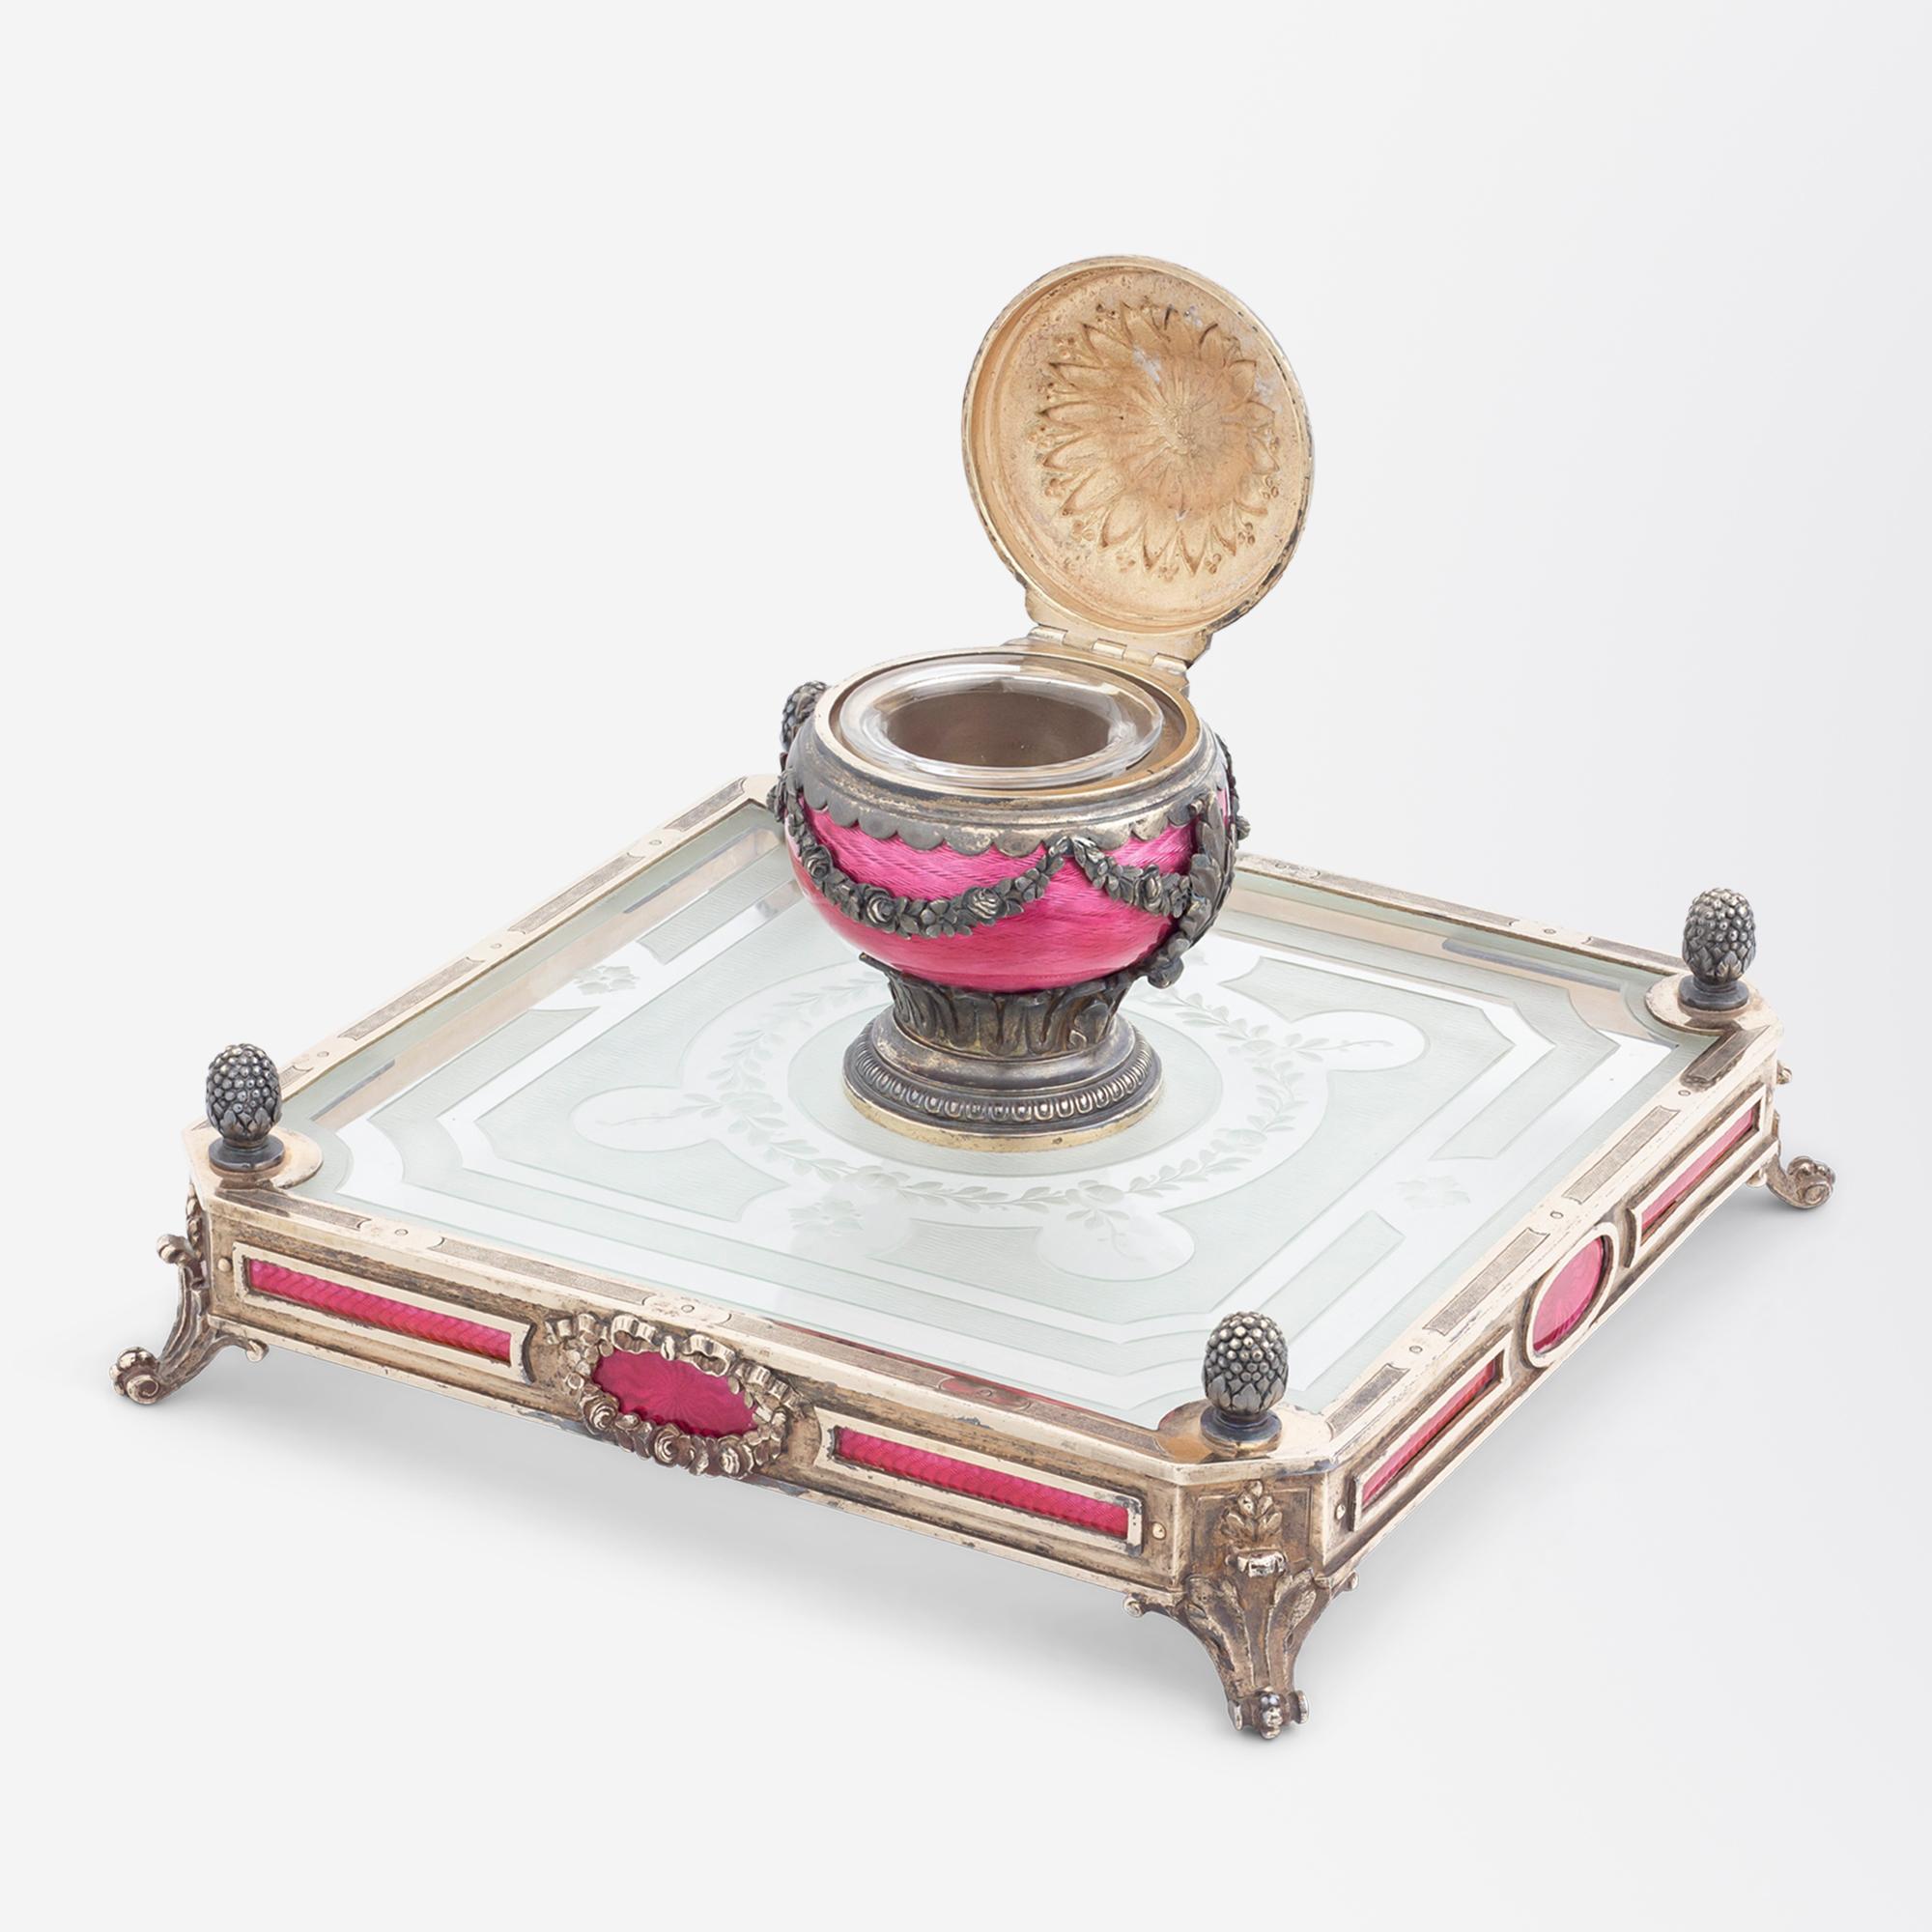 This inkwell is one of the finest examples we have had in our collection to date. Crafted by the firm 'Dreyfous' the inkwell is made from .800 purity silver, etched crystal and cranberry guilloche enamel. The square form crystal base which sits upon